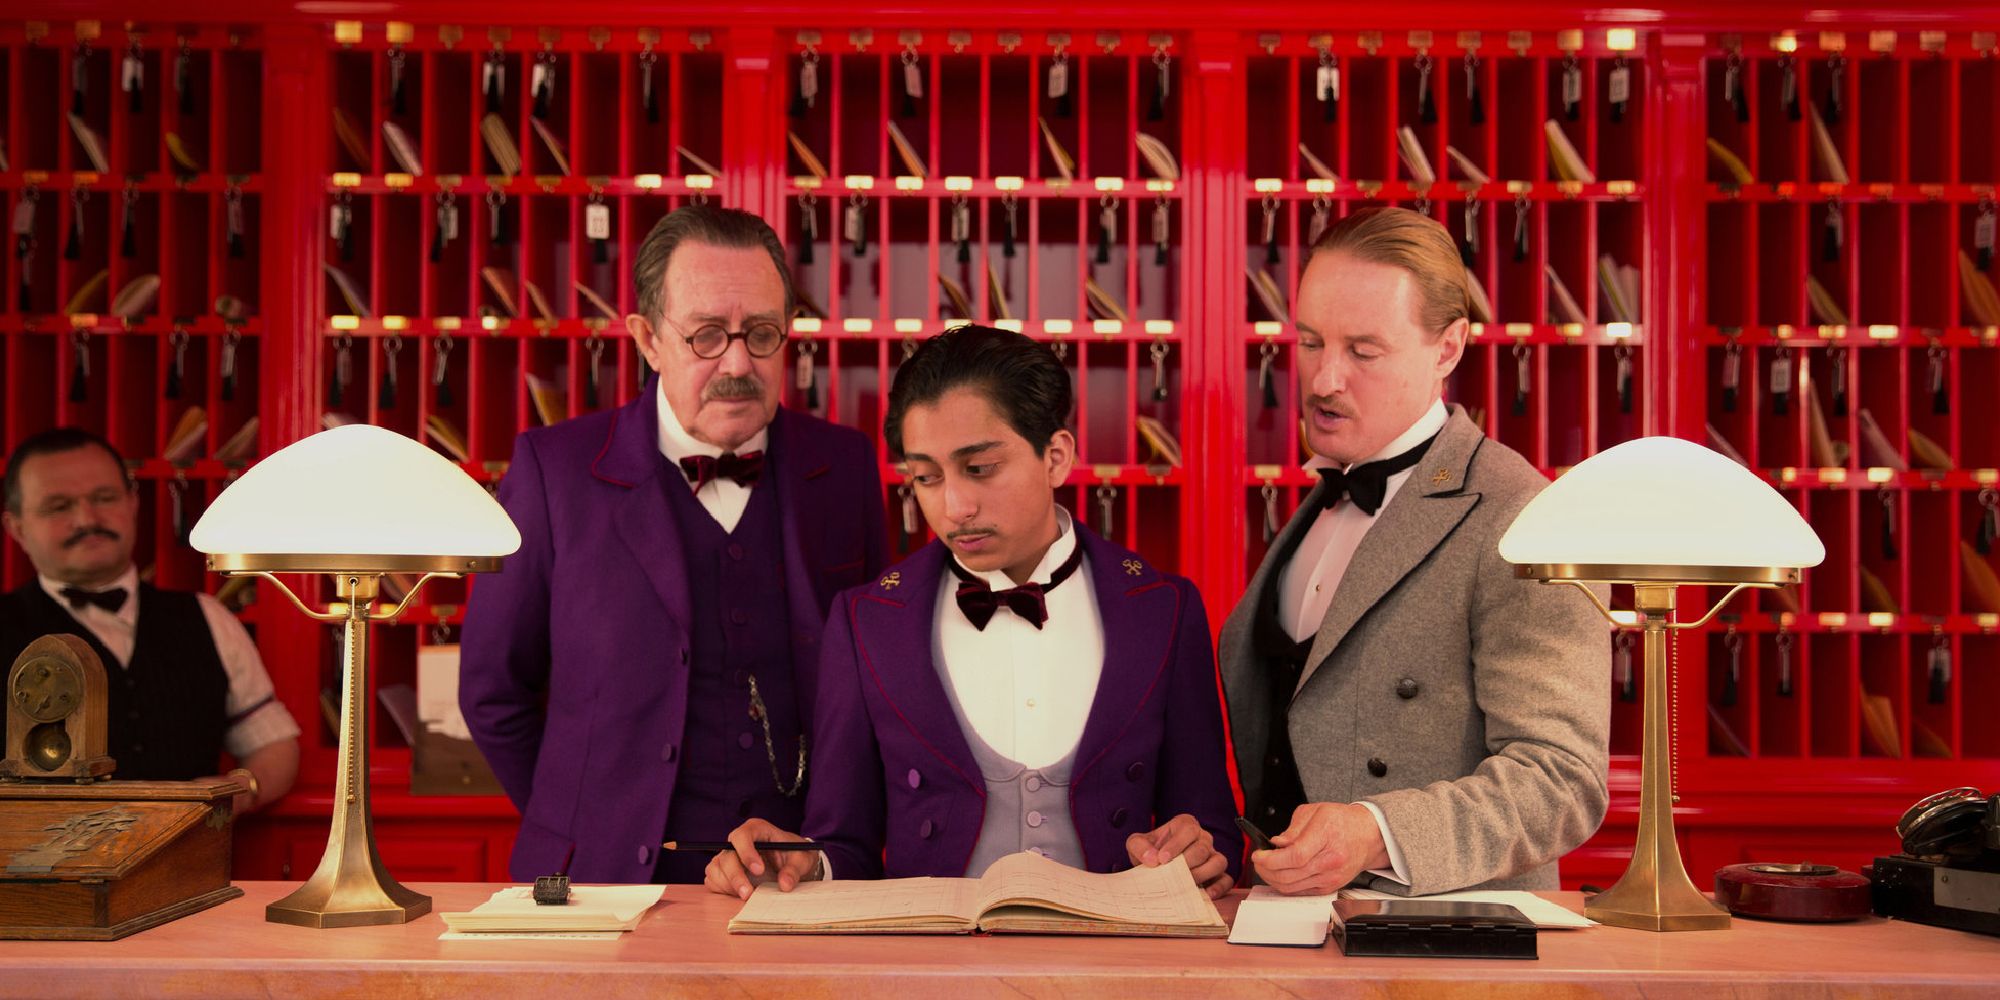 Owen Wilson and Tony Revolori look at a ledger at the lobby's front desk in The Grand Budapest Hotel